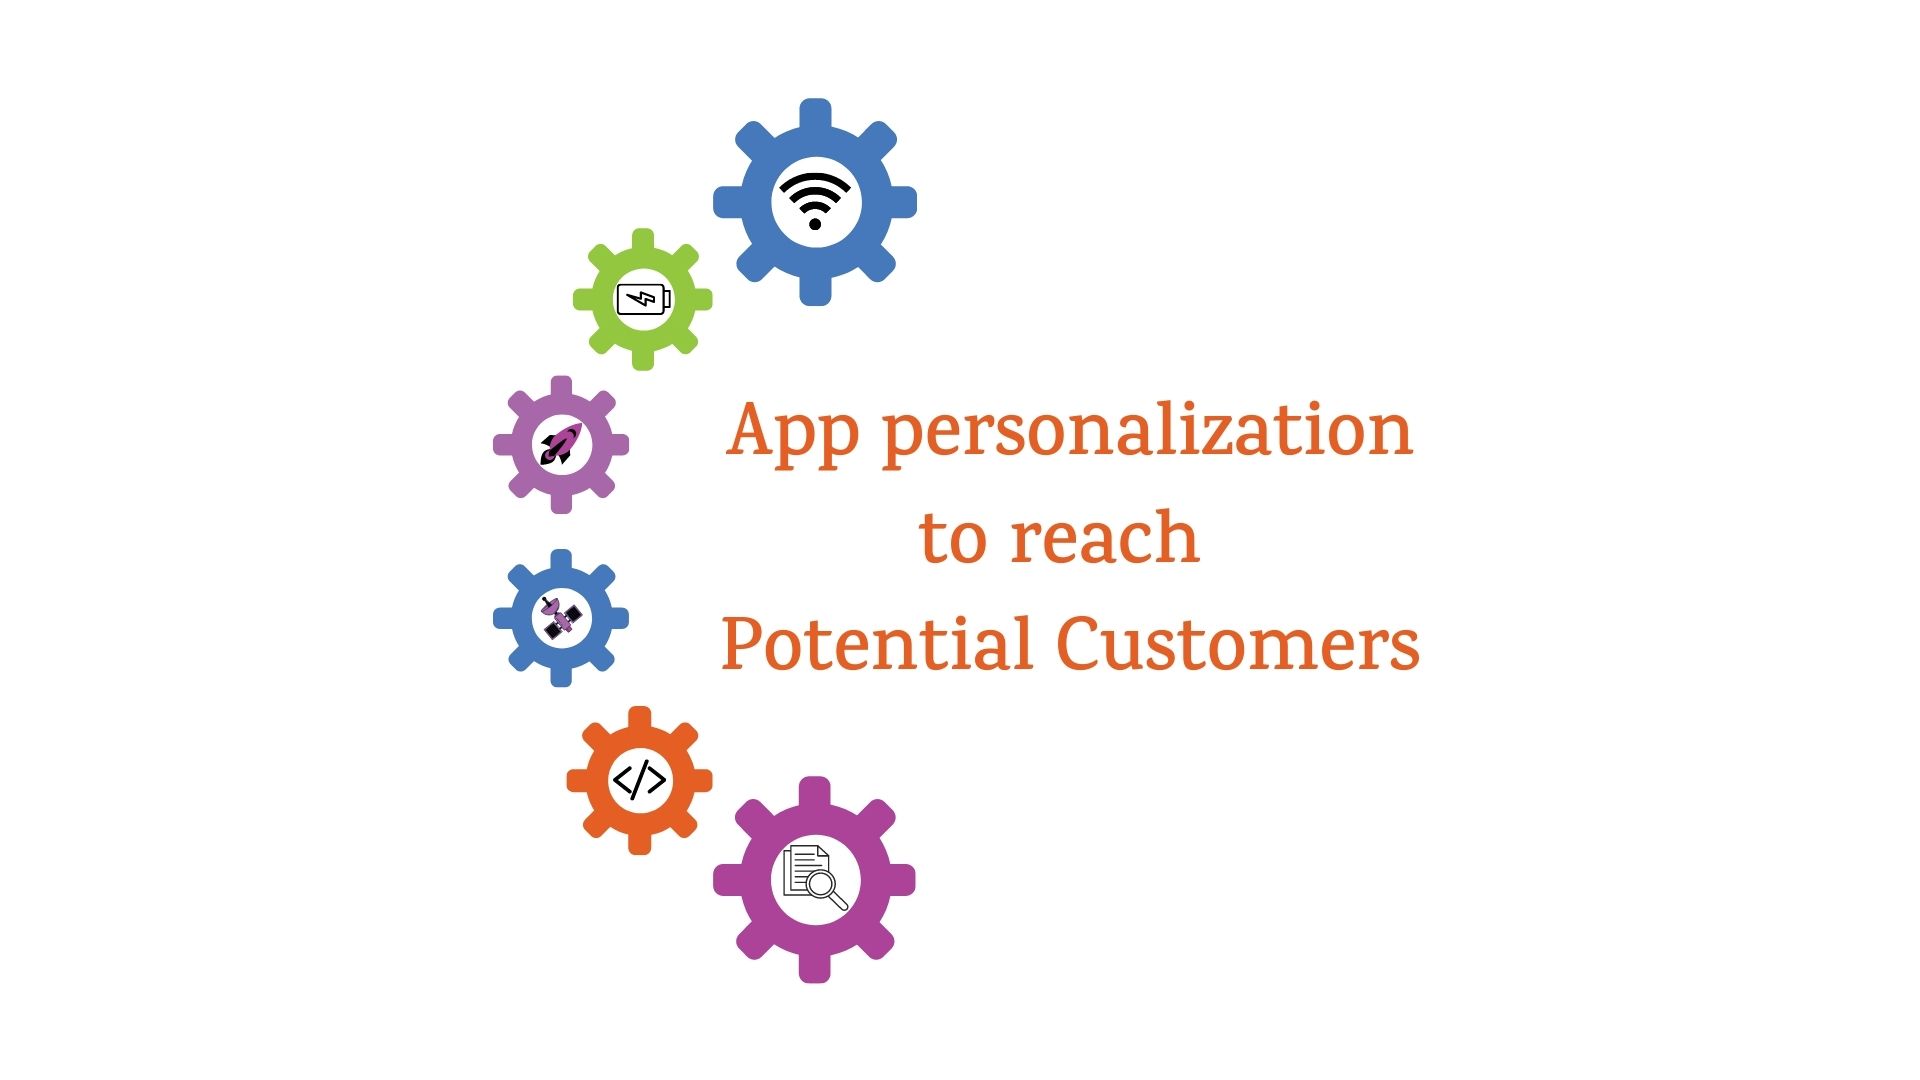 How does Mobile App personalization help engage potential customers?